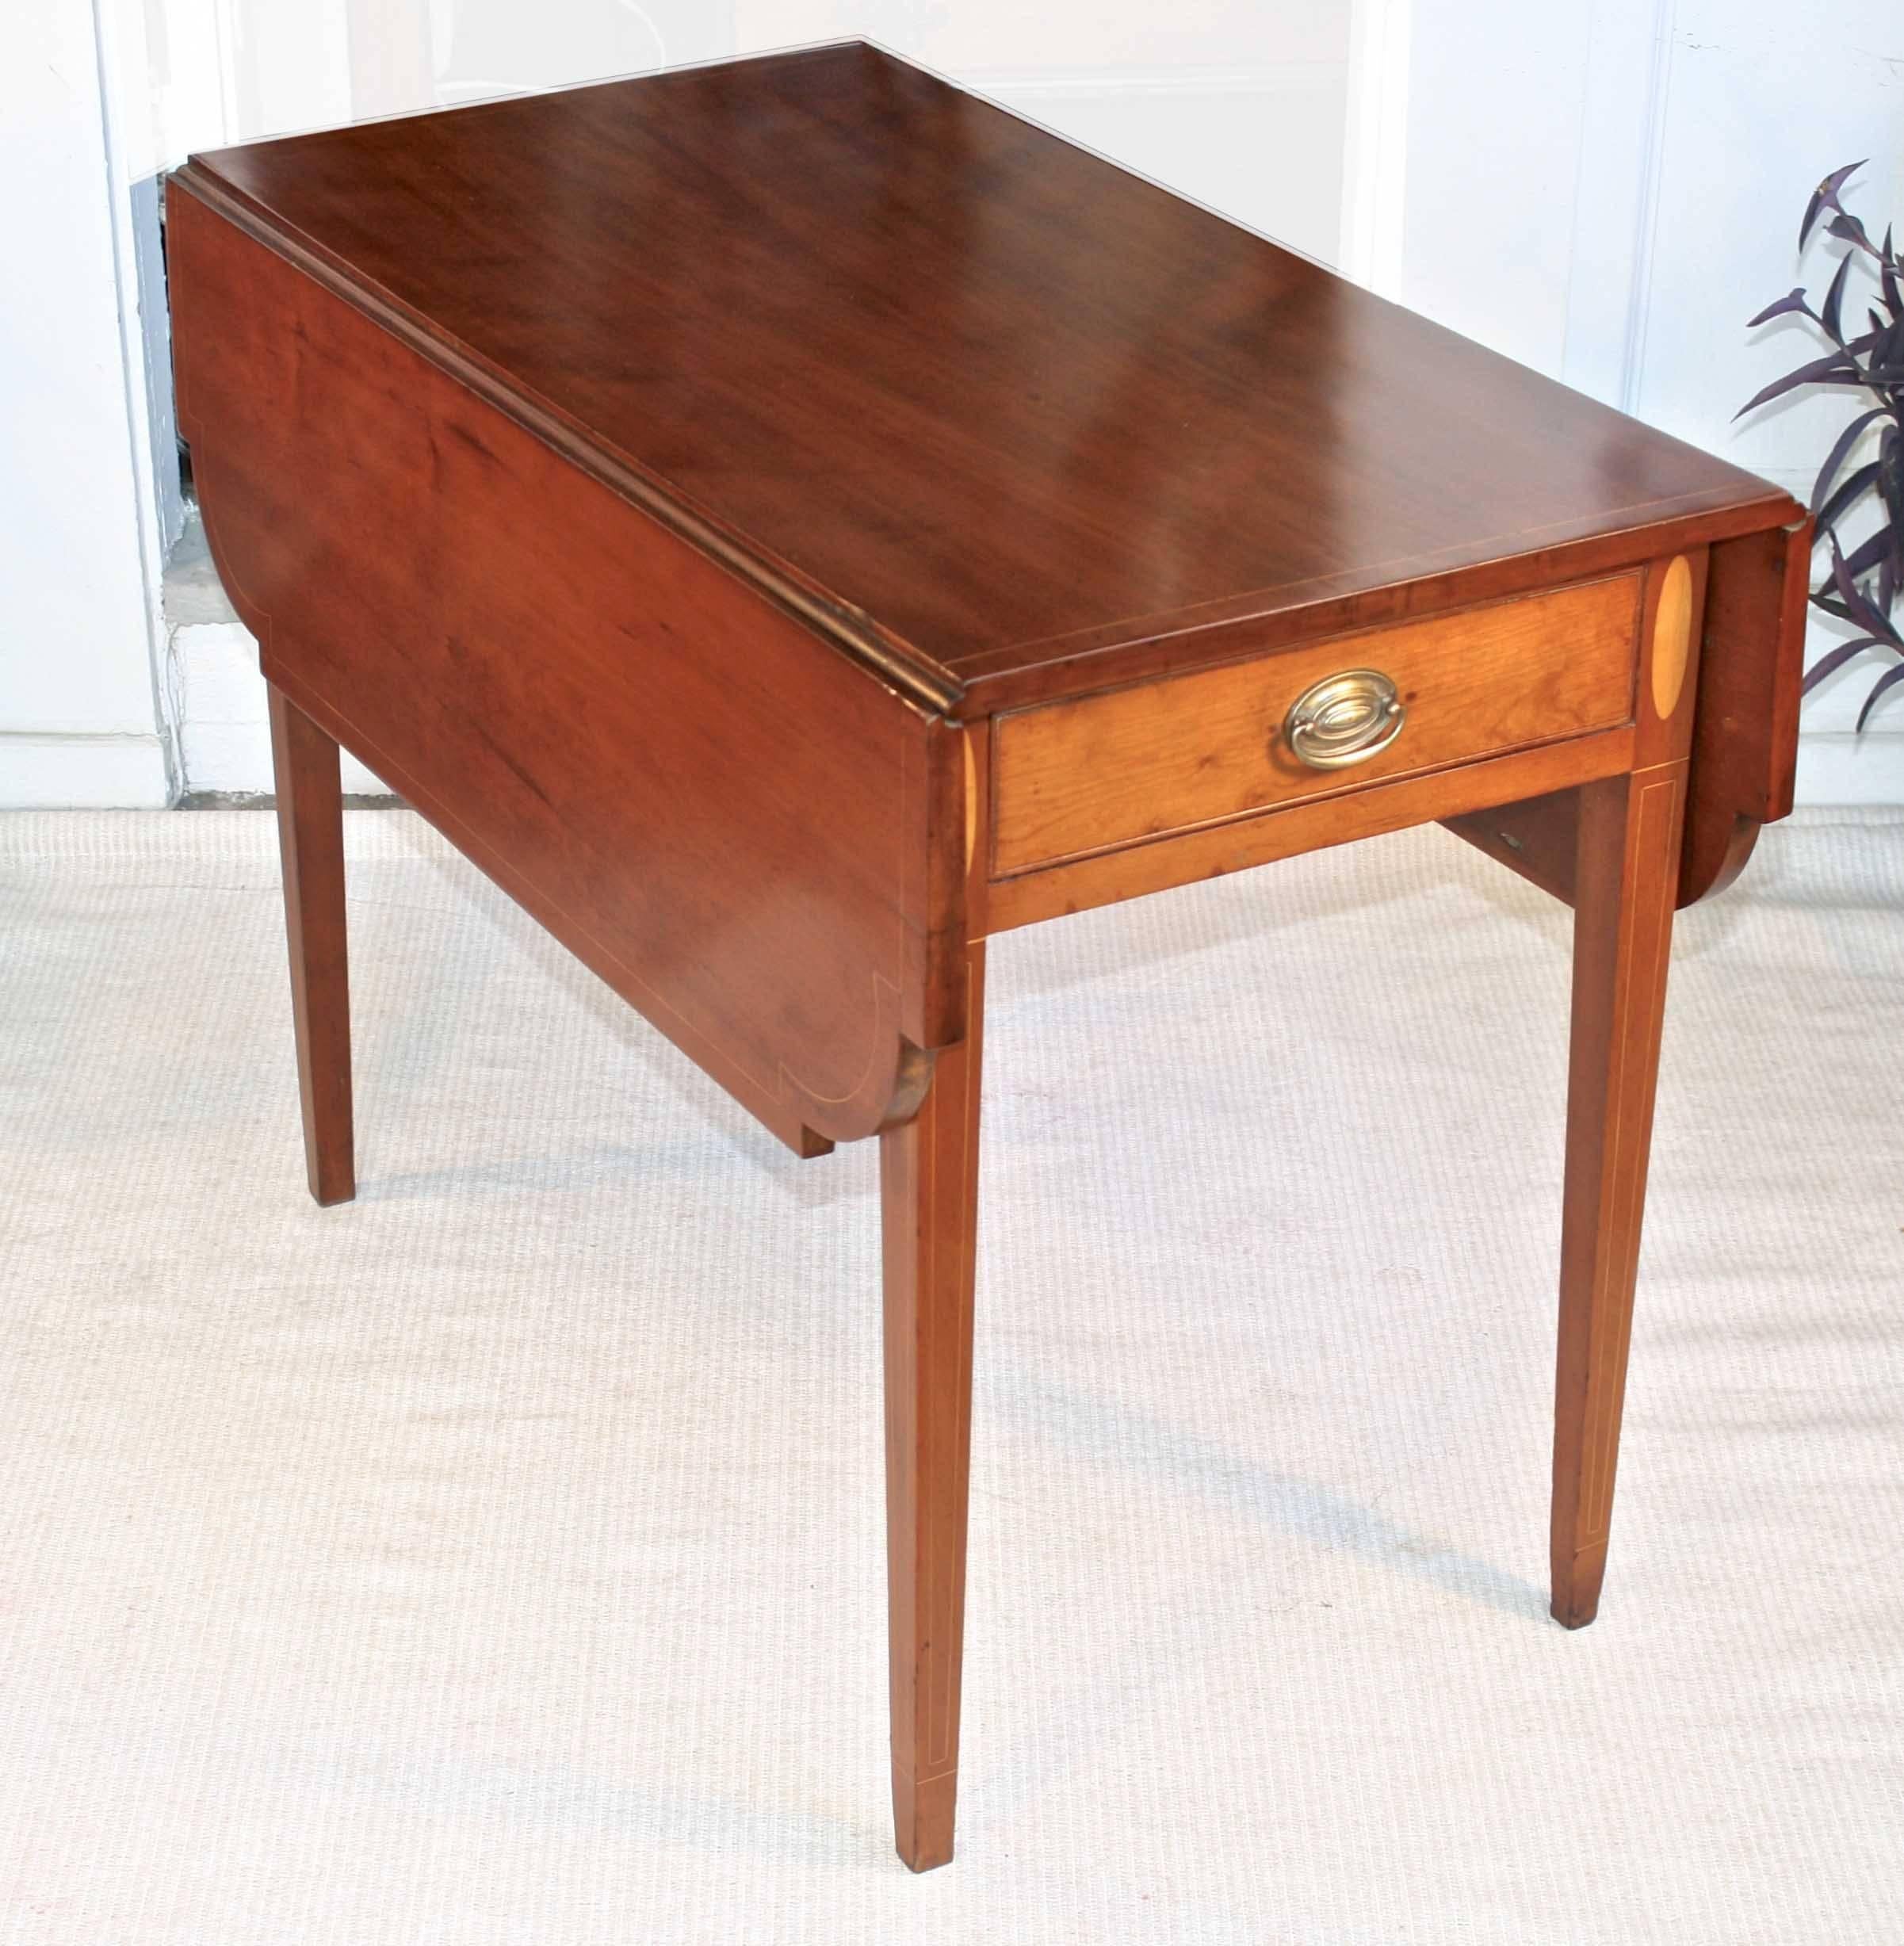 In the Hepplewhite manner, a satinwood fine line-inlaid cherrywood drop-leaf Pembroke table with quarter-round inset corners. Both its functional and faux bead-edged drawer fronts are surrounded by elliptical satinwood inlays. Its brass bale pulls